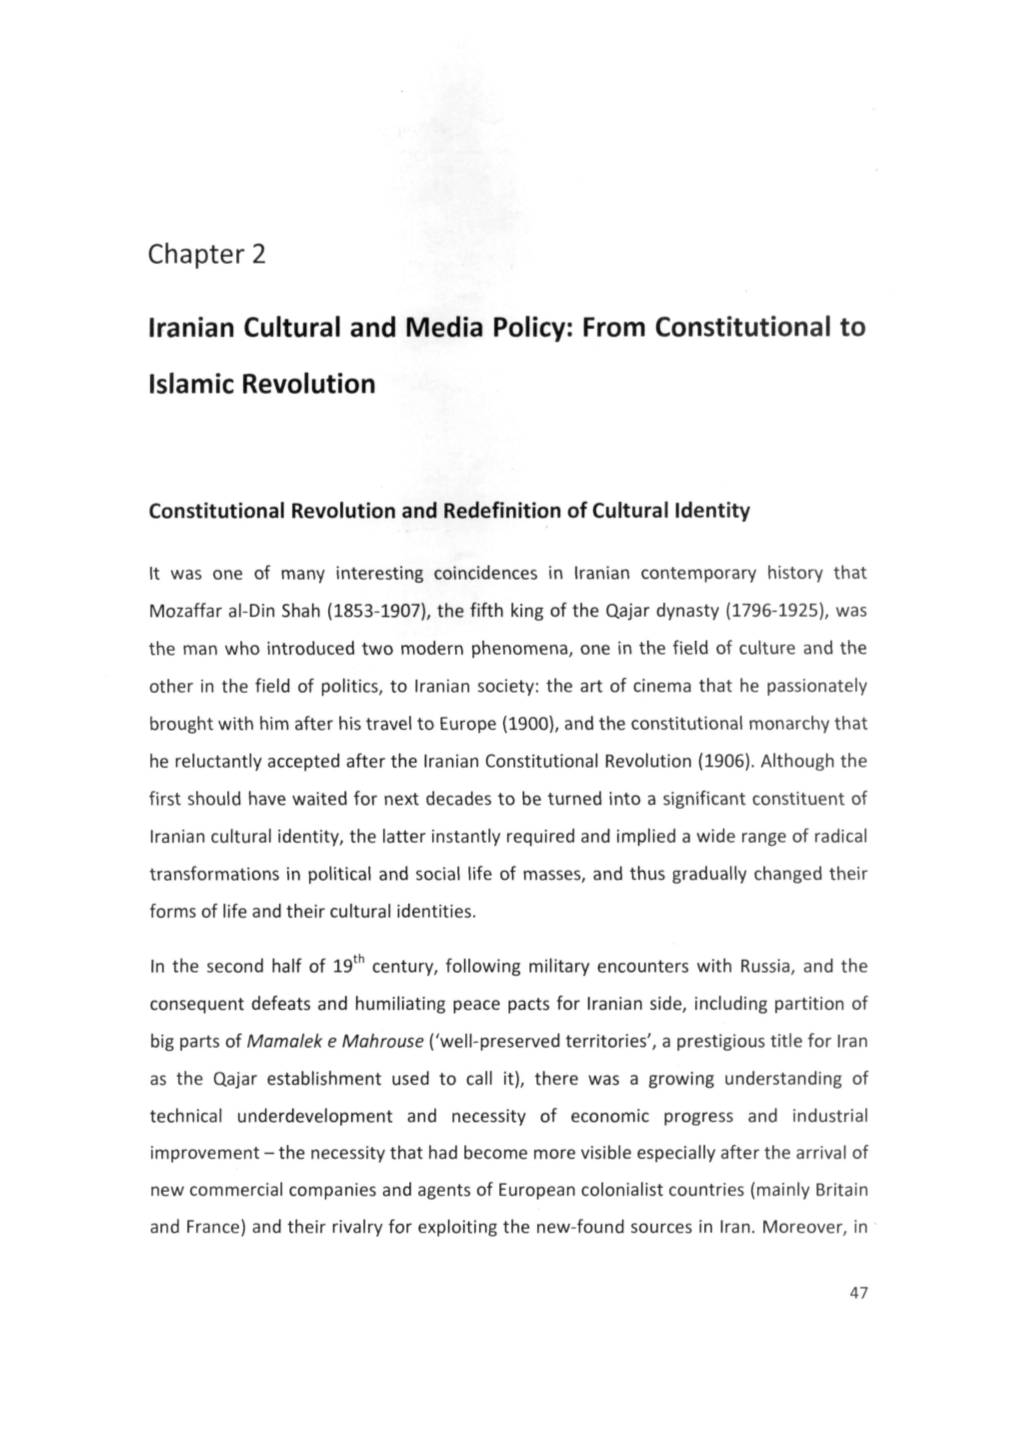 Chapter 2 Iranian Cultural and Media Policy: from Constitutional To